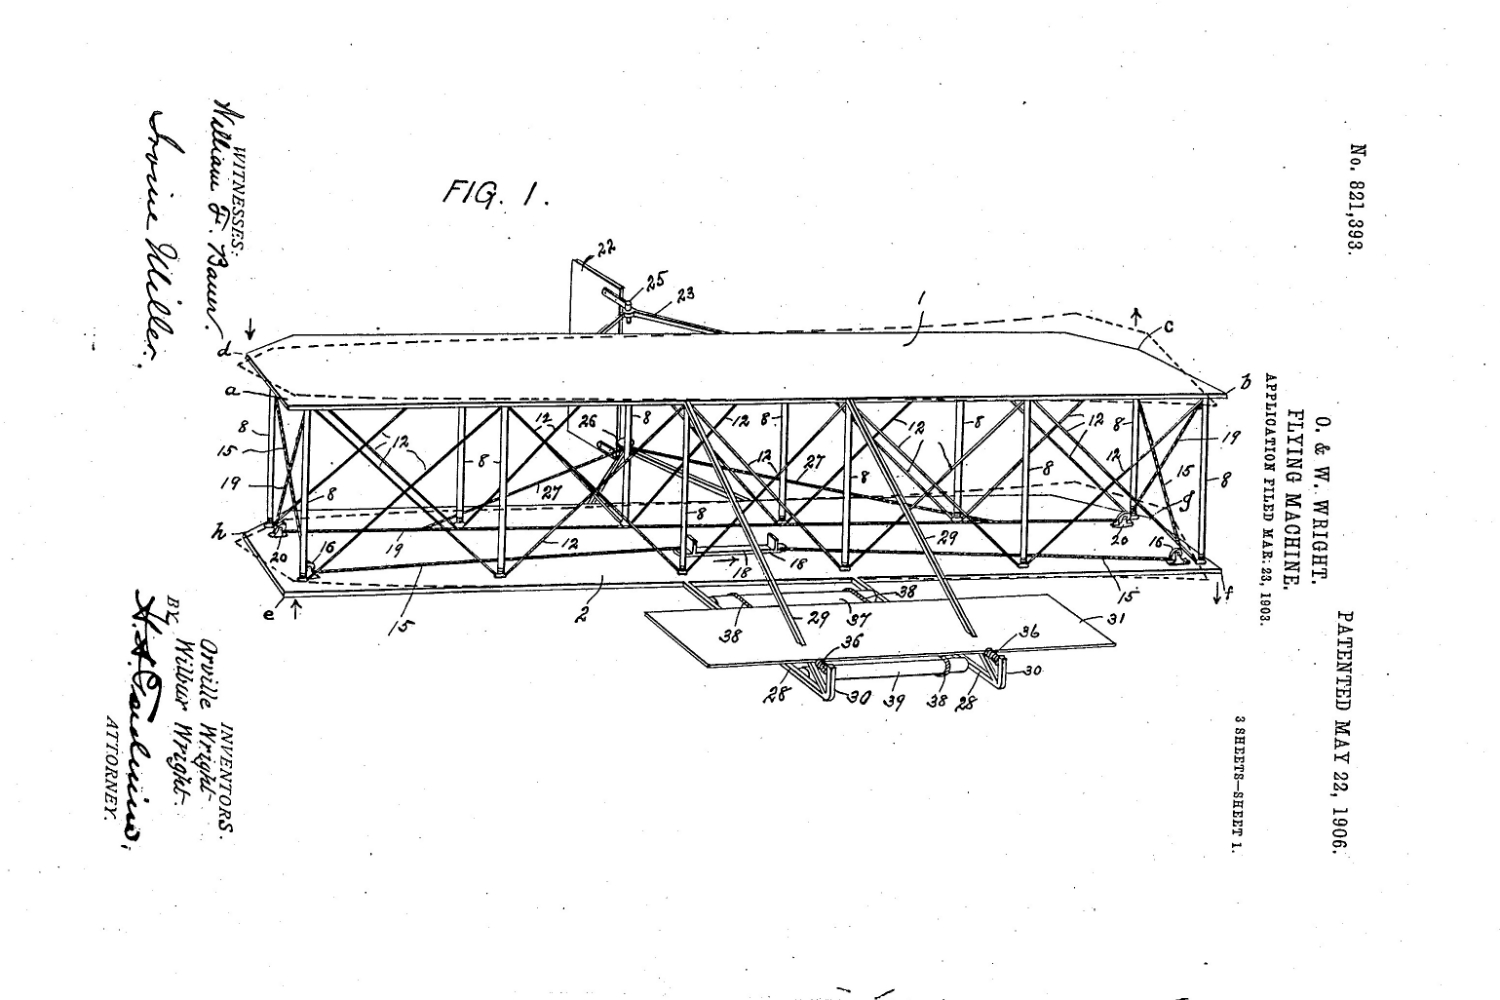 wright brothers 1903 flying machine patent found